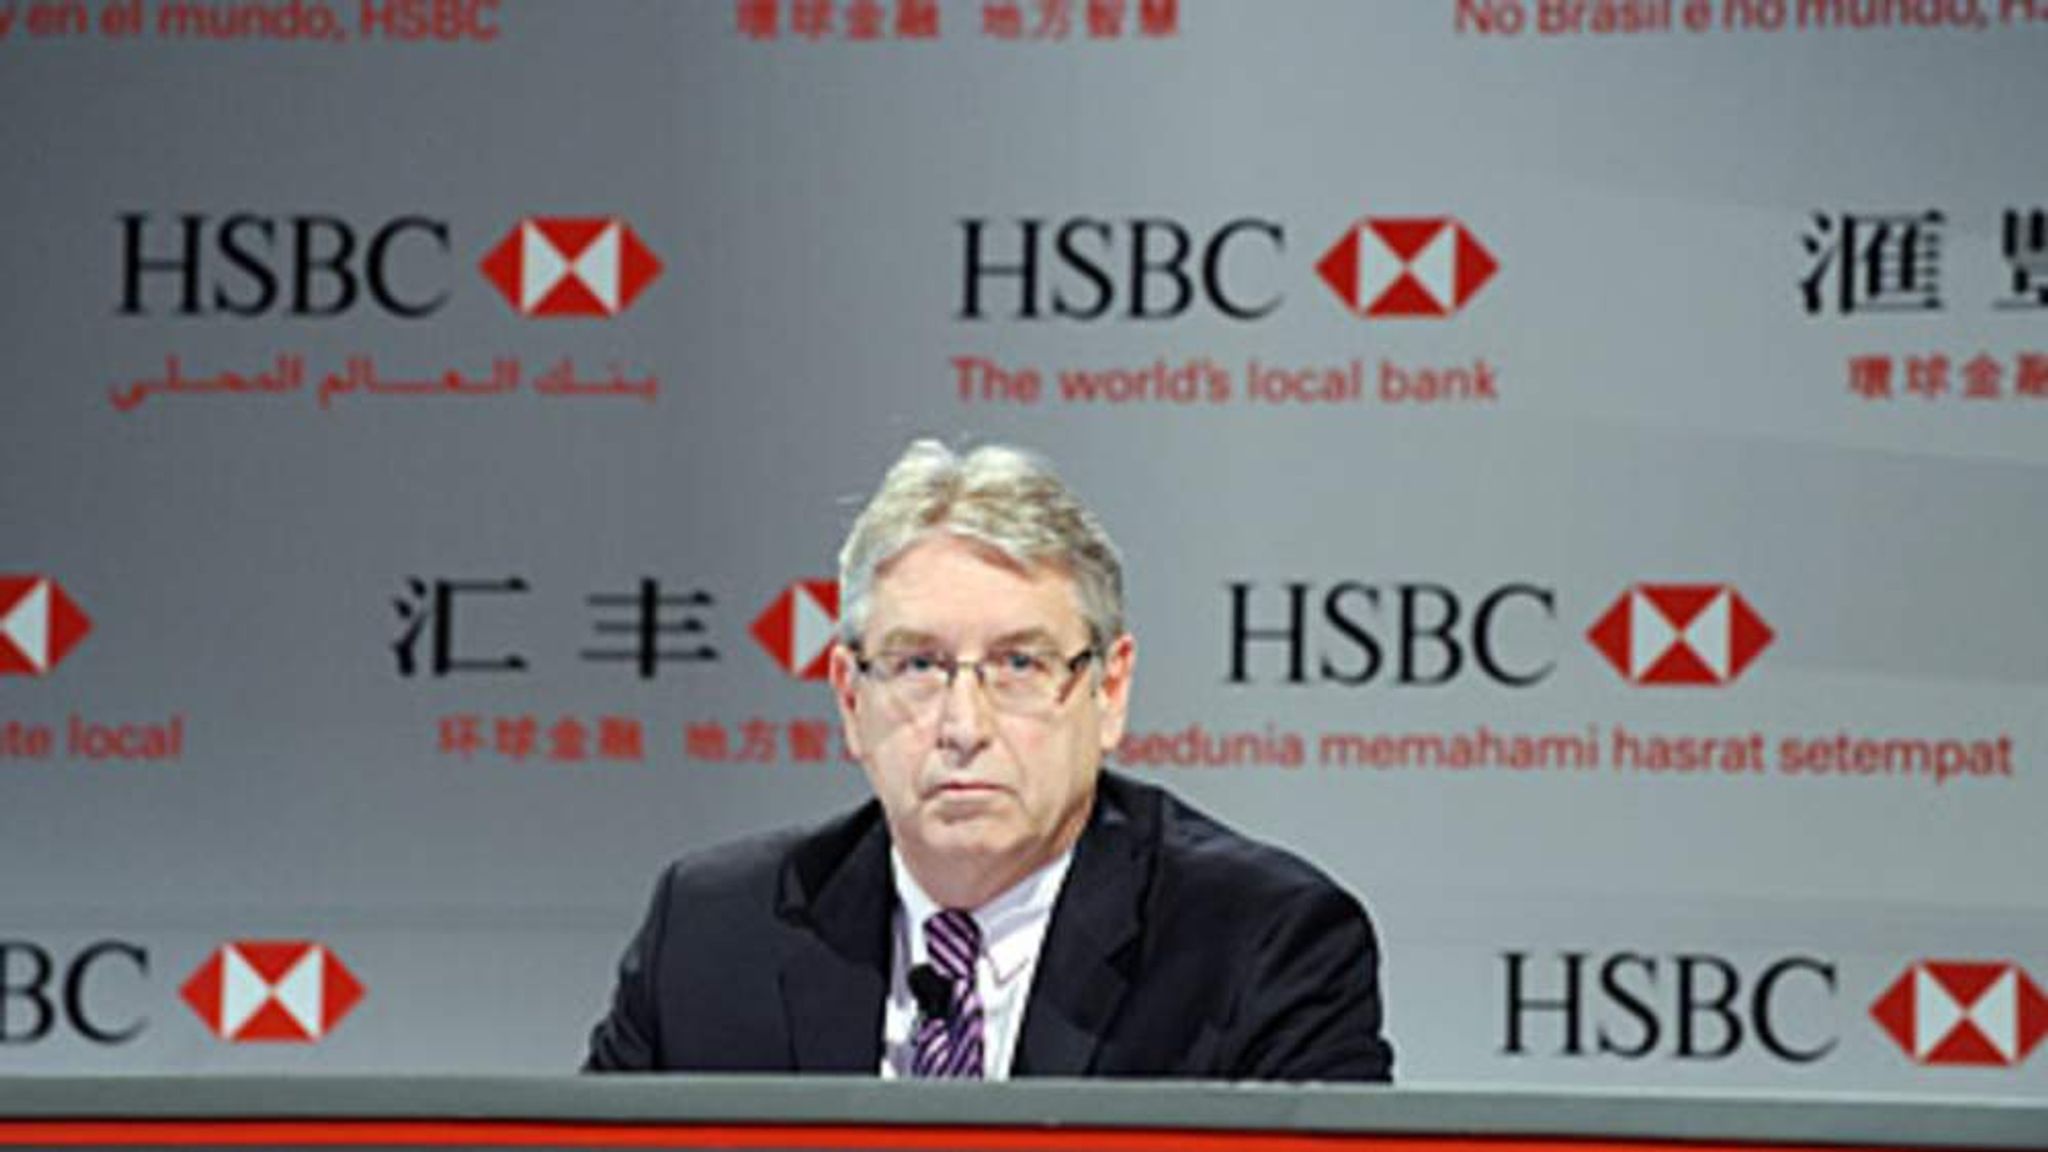 Hsbc Rejects Boss Quit Claim As Offensive Business News Sky News 7397